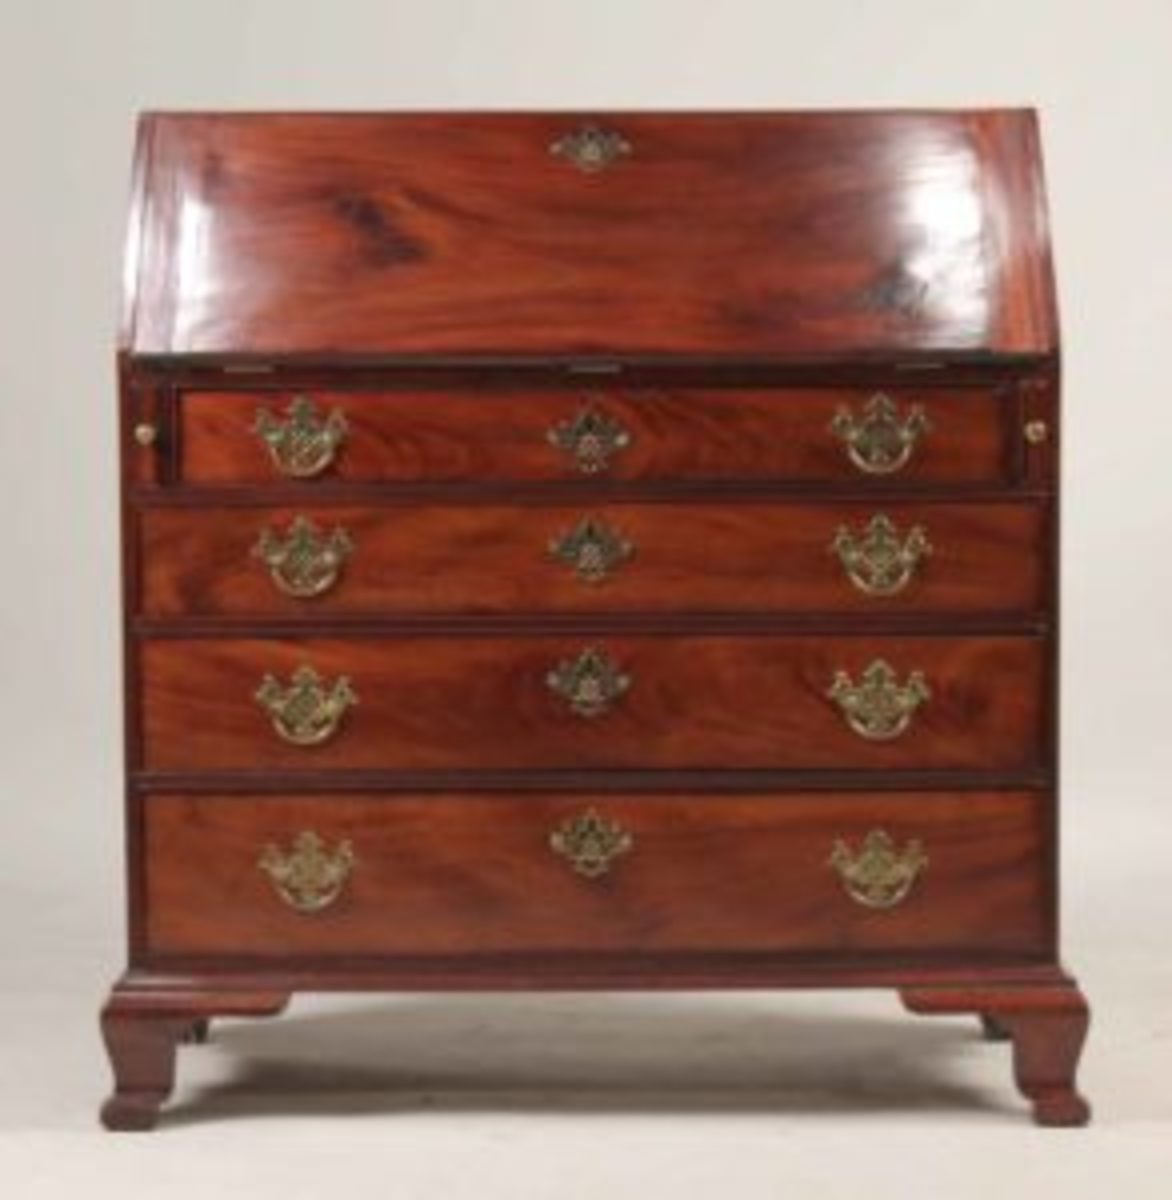 Chippendale mahogany slant-front desk attributed to John Townsend of Newport, Rhode Island, circa 1780-1790.